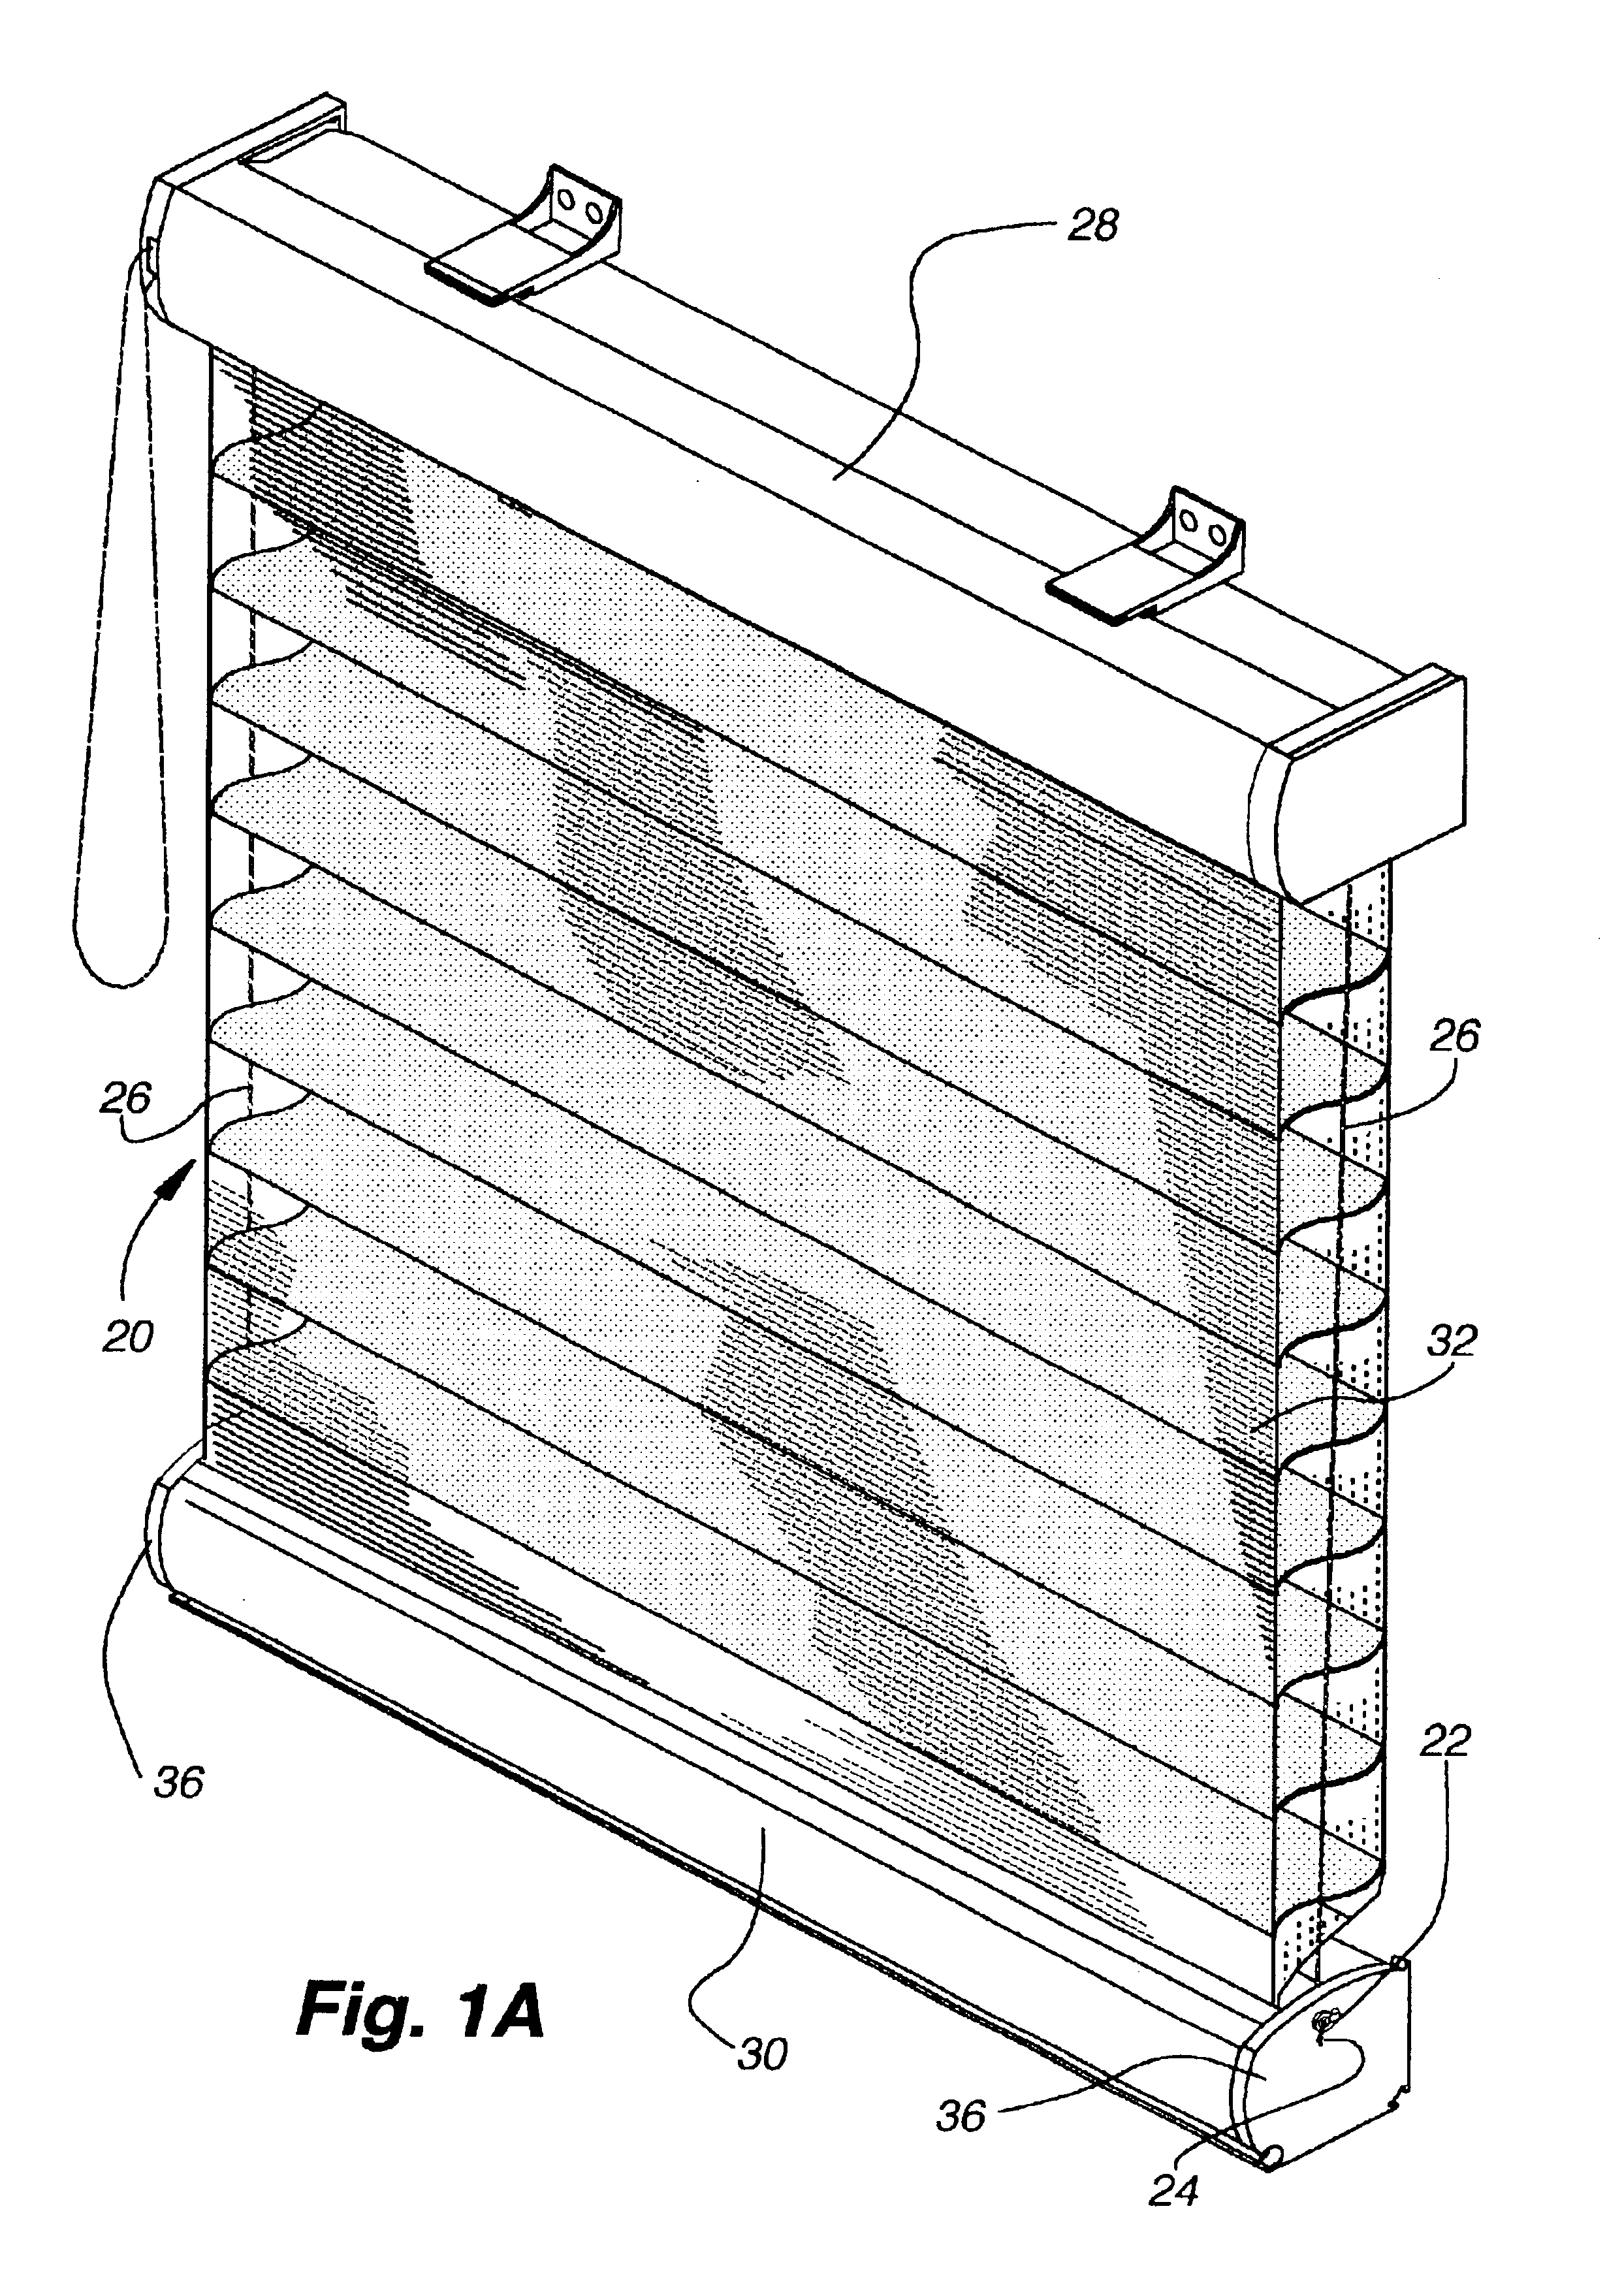 Window covering with improved anchor for operating cord